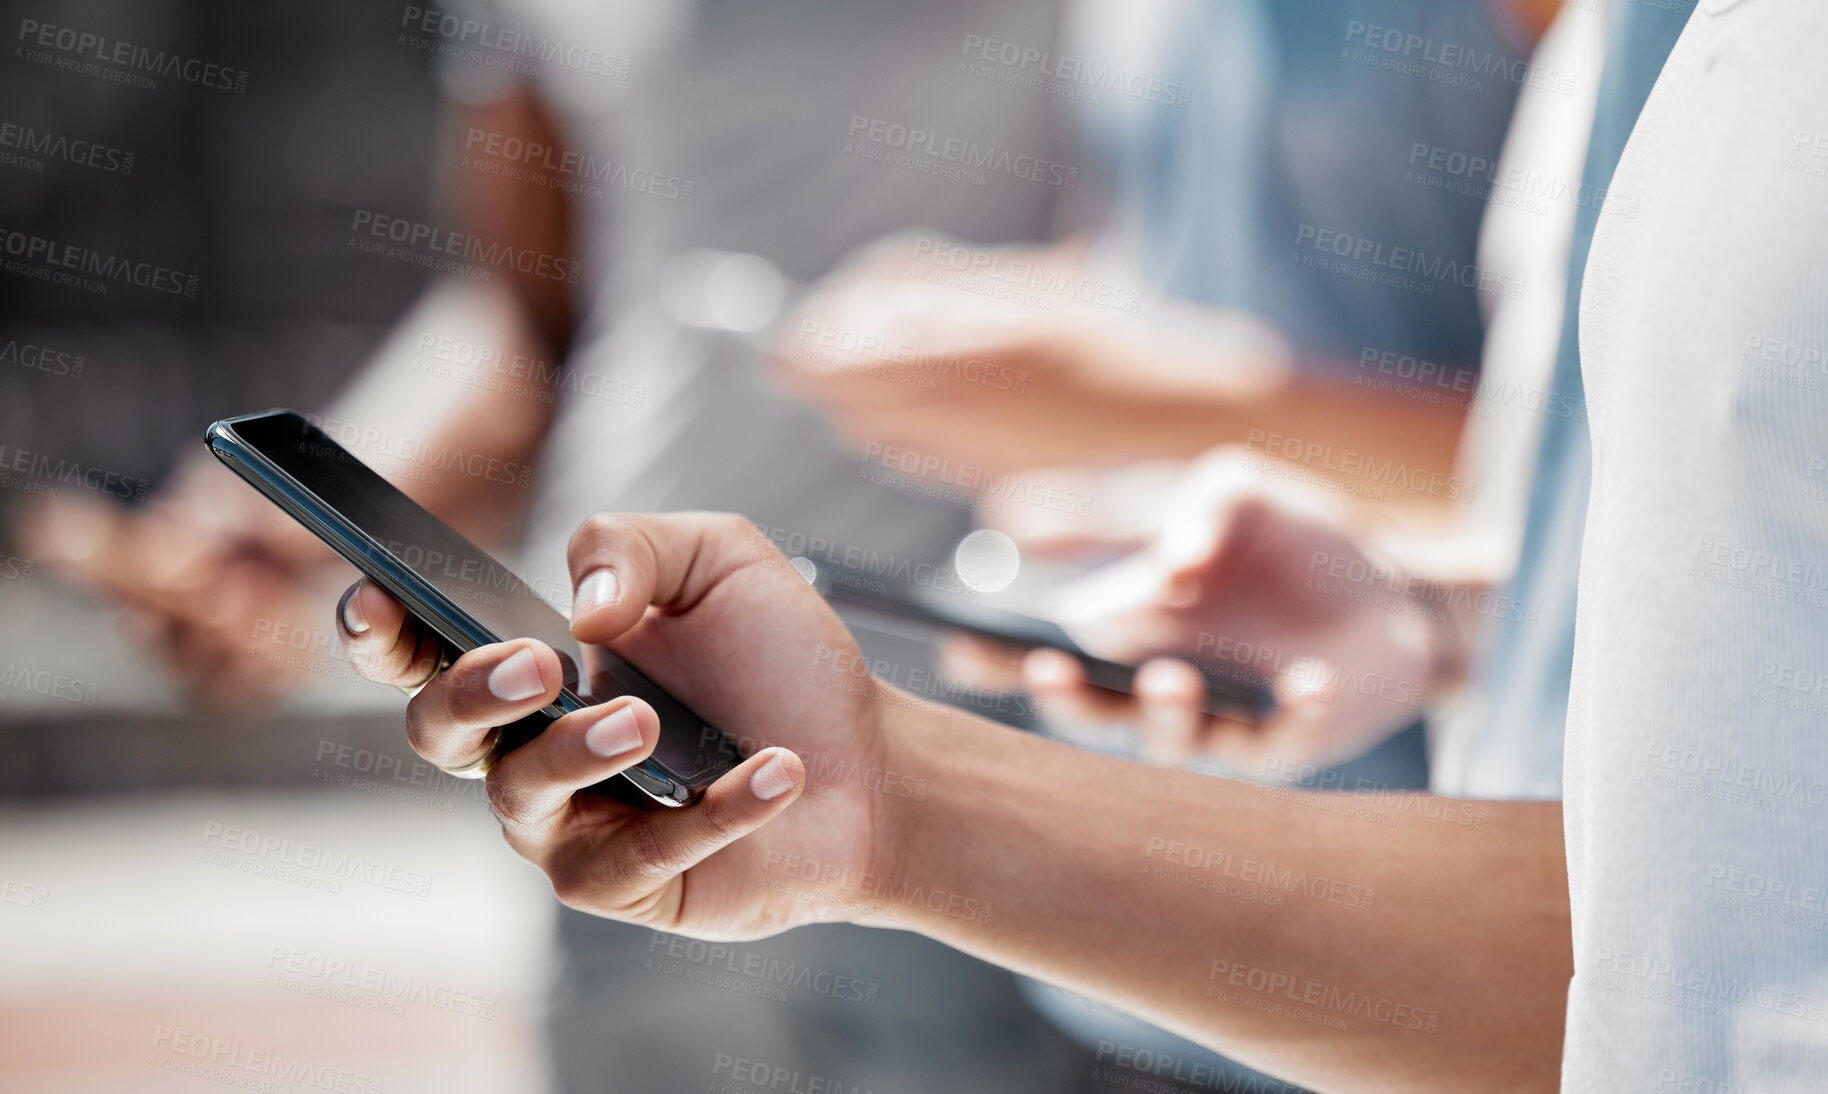 Buy stock photo Hands of group in line on smartphone, social media or internet surfing or browsing online. Tech, side view and friends or people on devices, phones or cellphones networking, chat or sharing data.

